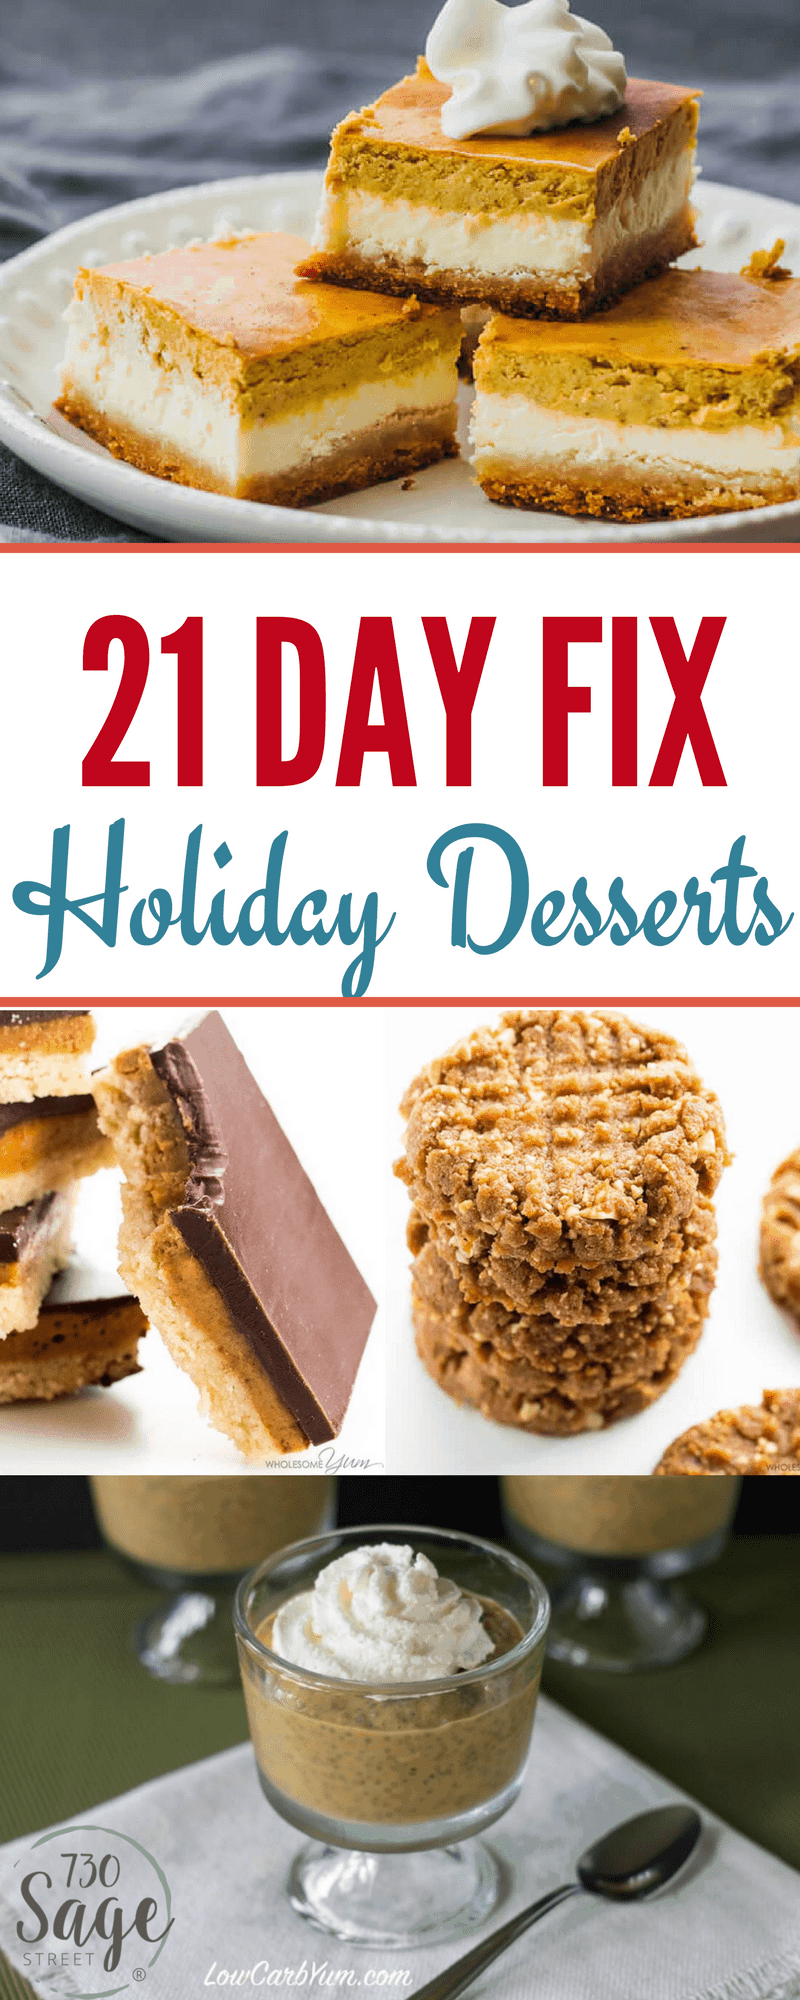 21 Day Fix Holiday Desserts - Delicious & Guilt-Free - 730 Sage Street